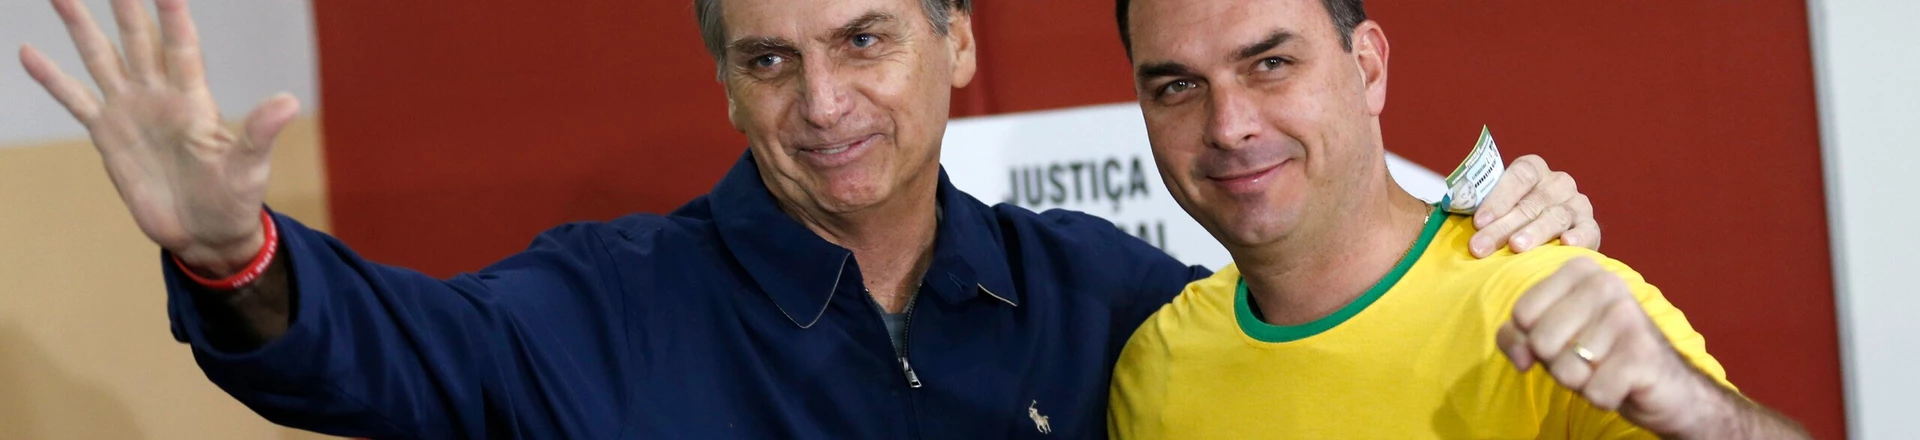 FILE - In this Oct. 7, 2018 file photo, then presidential frontrunner Jair Bolsonaro, left, and his son Flavio, acknowledge reporters at a polling station in Rio de Janeiro, Brazil. The son of Brazilian President-elect Jair Bolsonaro is denying wrongdoing in a case involving suspect bank transactions. According to a recent Financial Activities Control Council report, Flavio Bolsonaro's driver deposited various amounts between January 2016 and January 2017. On Thursday, Dec. 13, 2018, Flavio Bolsonaro posted on Twitter that he had “done nothing wrong.” (AP Photo/Silvia Izquierdo, File)